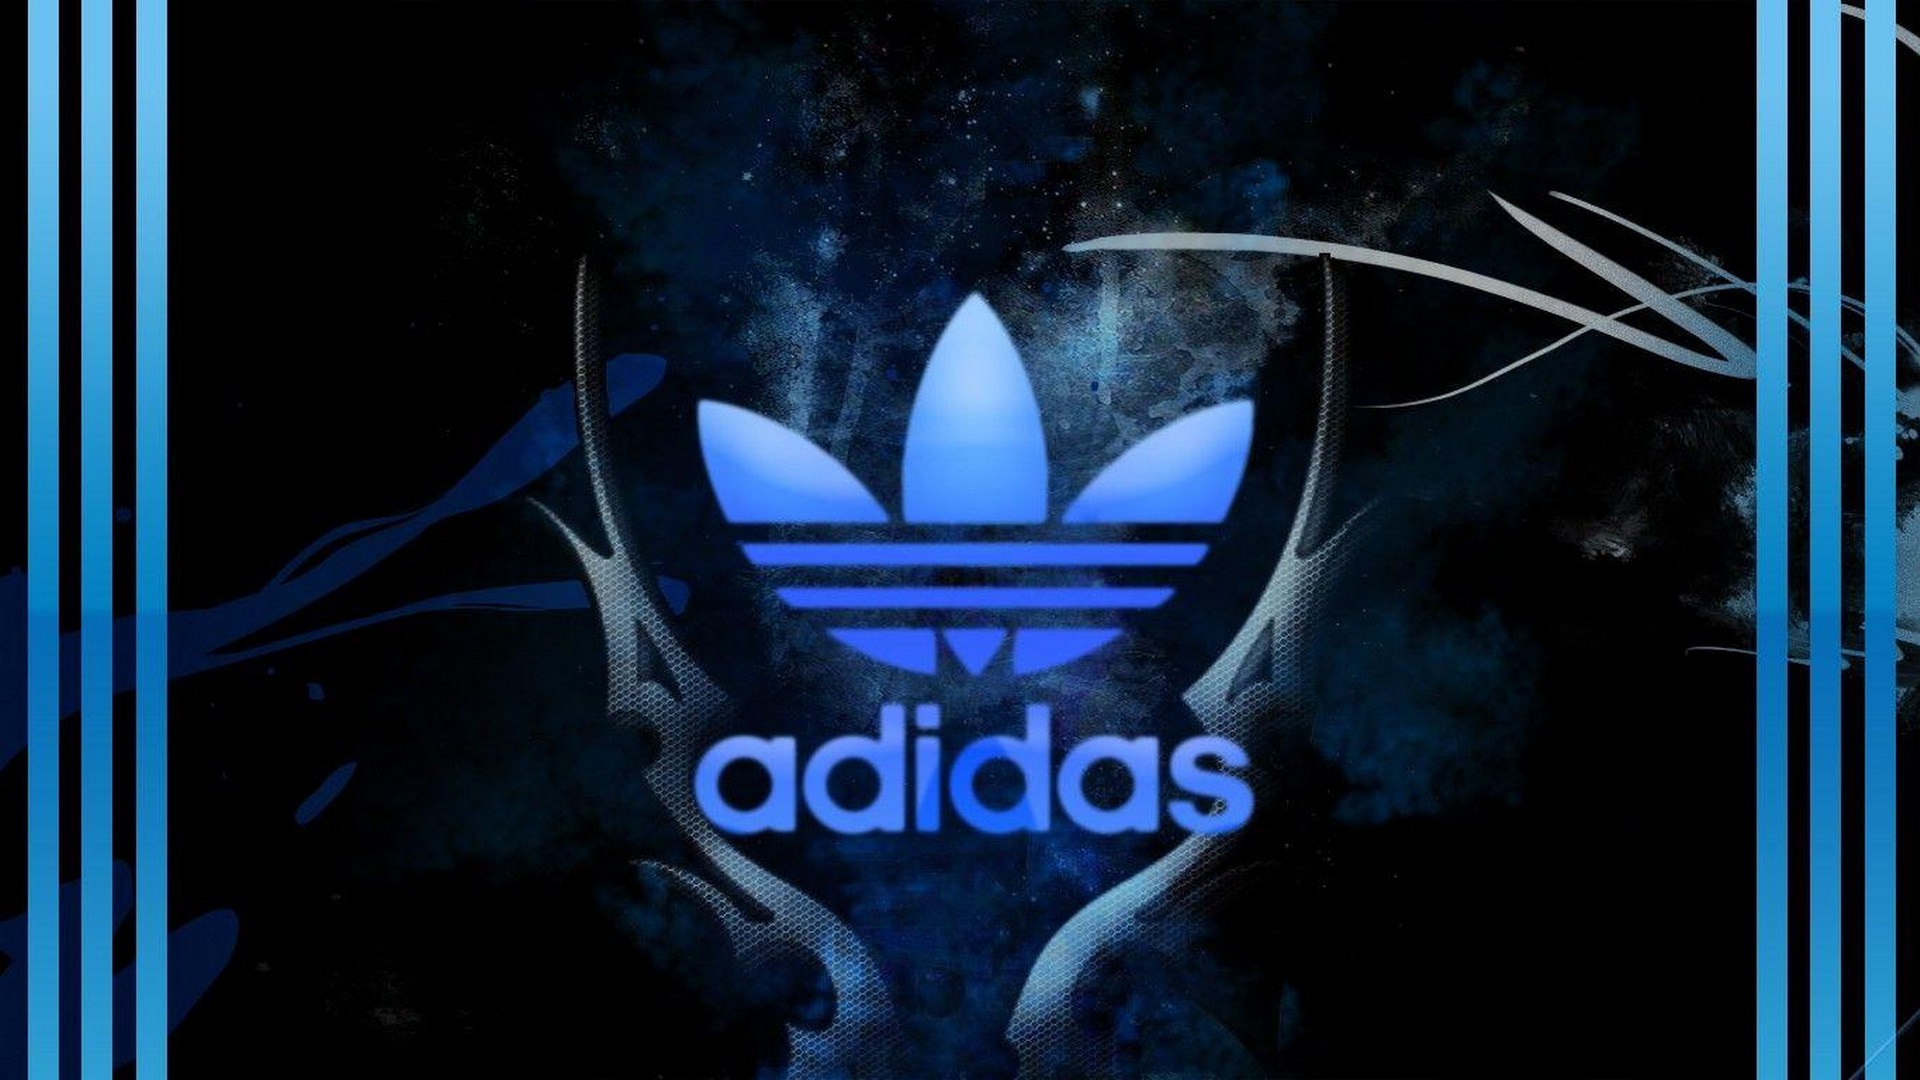 Wallpapers Computer Adidas With high-resolution 1920X1080 pixel. You can use this wallpaper for your Desktop Computer Backgrounds, Mac Wallpapers, Android Lock screen or iPhone Screensavers and another smartphone device